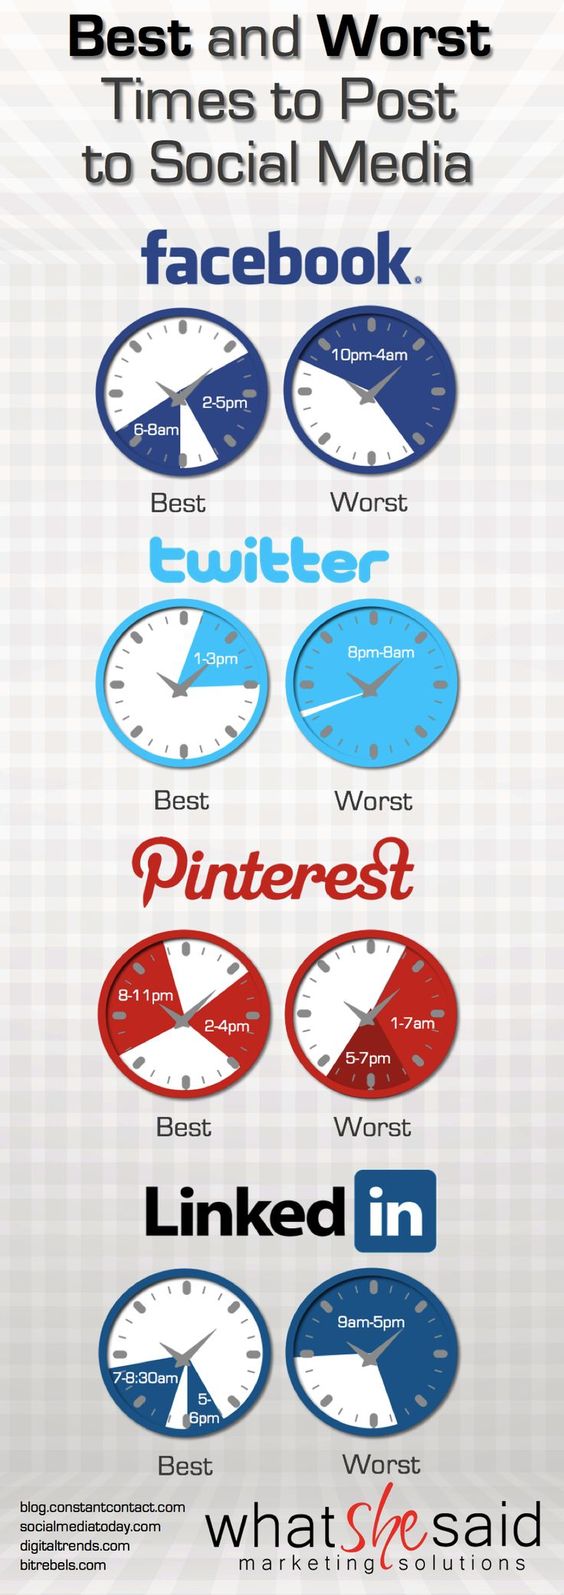 Best and Worst Times  #Social Media Marketing, Social Media #Marketing. #Time to post